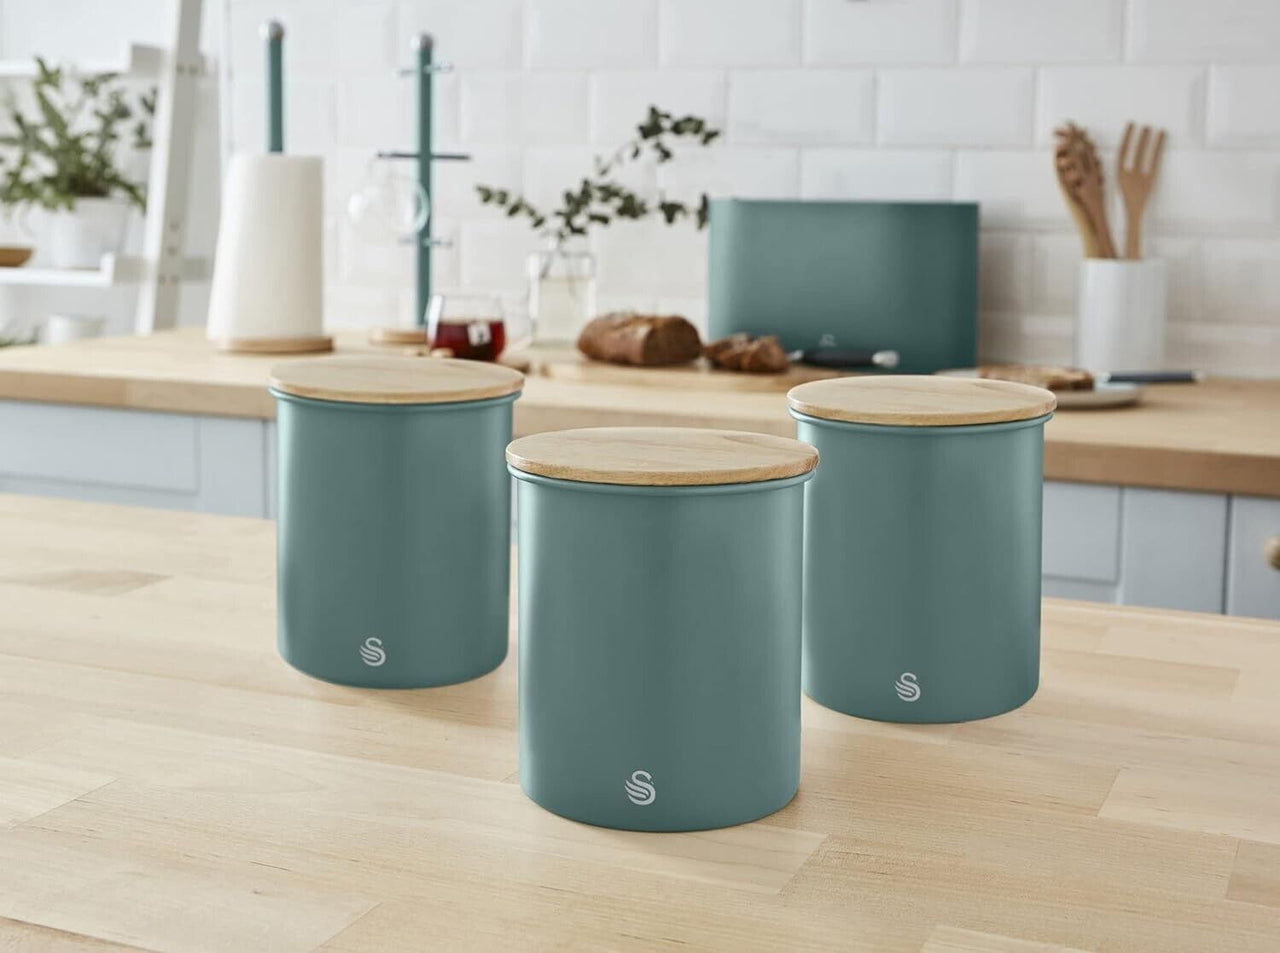 Swan Nordic Green Breadbin Canisters Matching Kitchen Storage Set